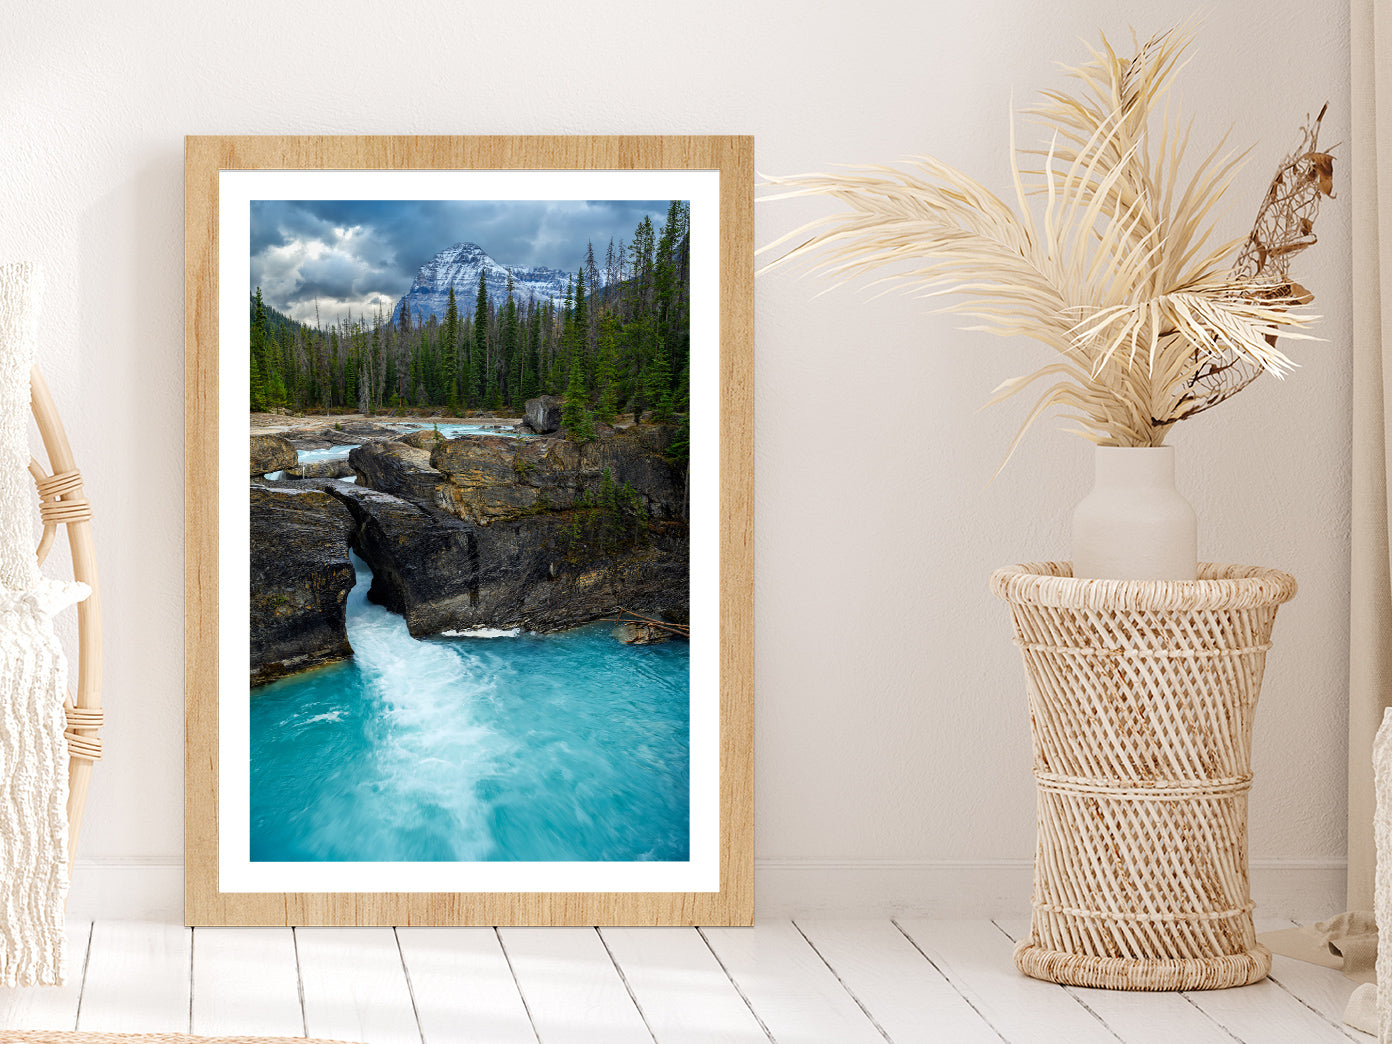 River Flows Down From Mountains Glass Framed Wall Art, Ready to Hang Quality Print With White Border Oak